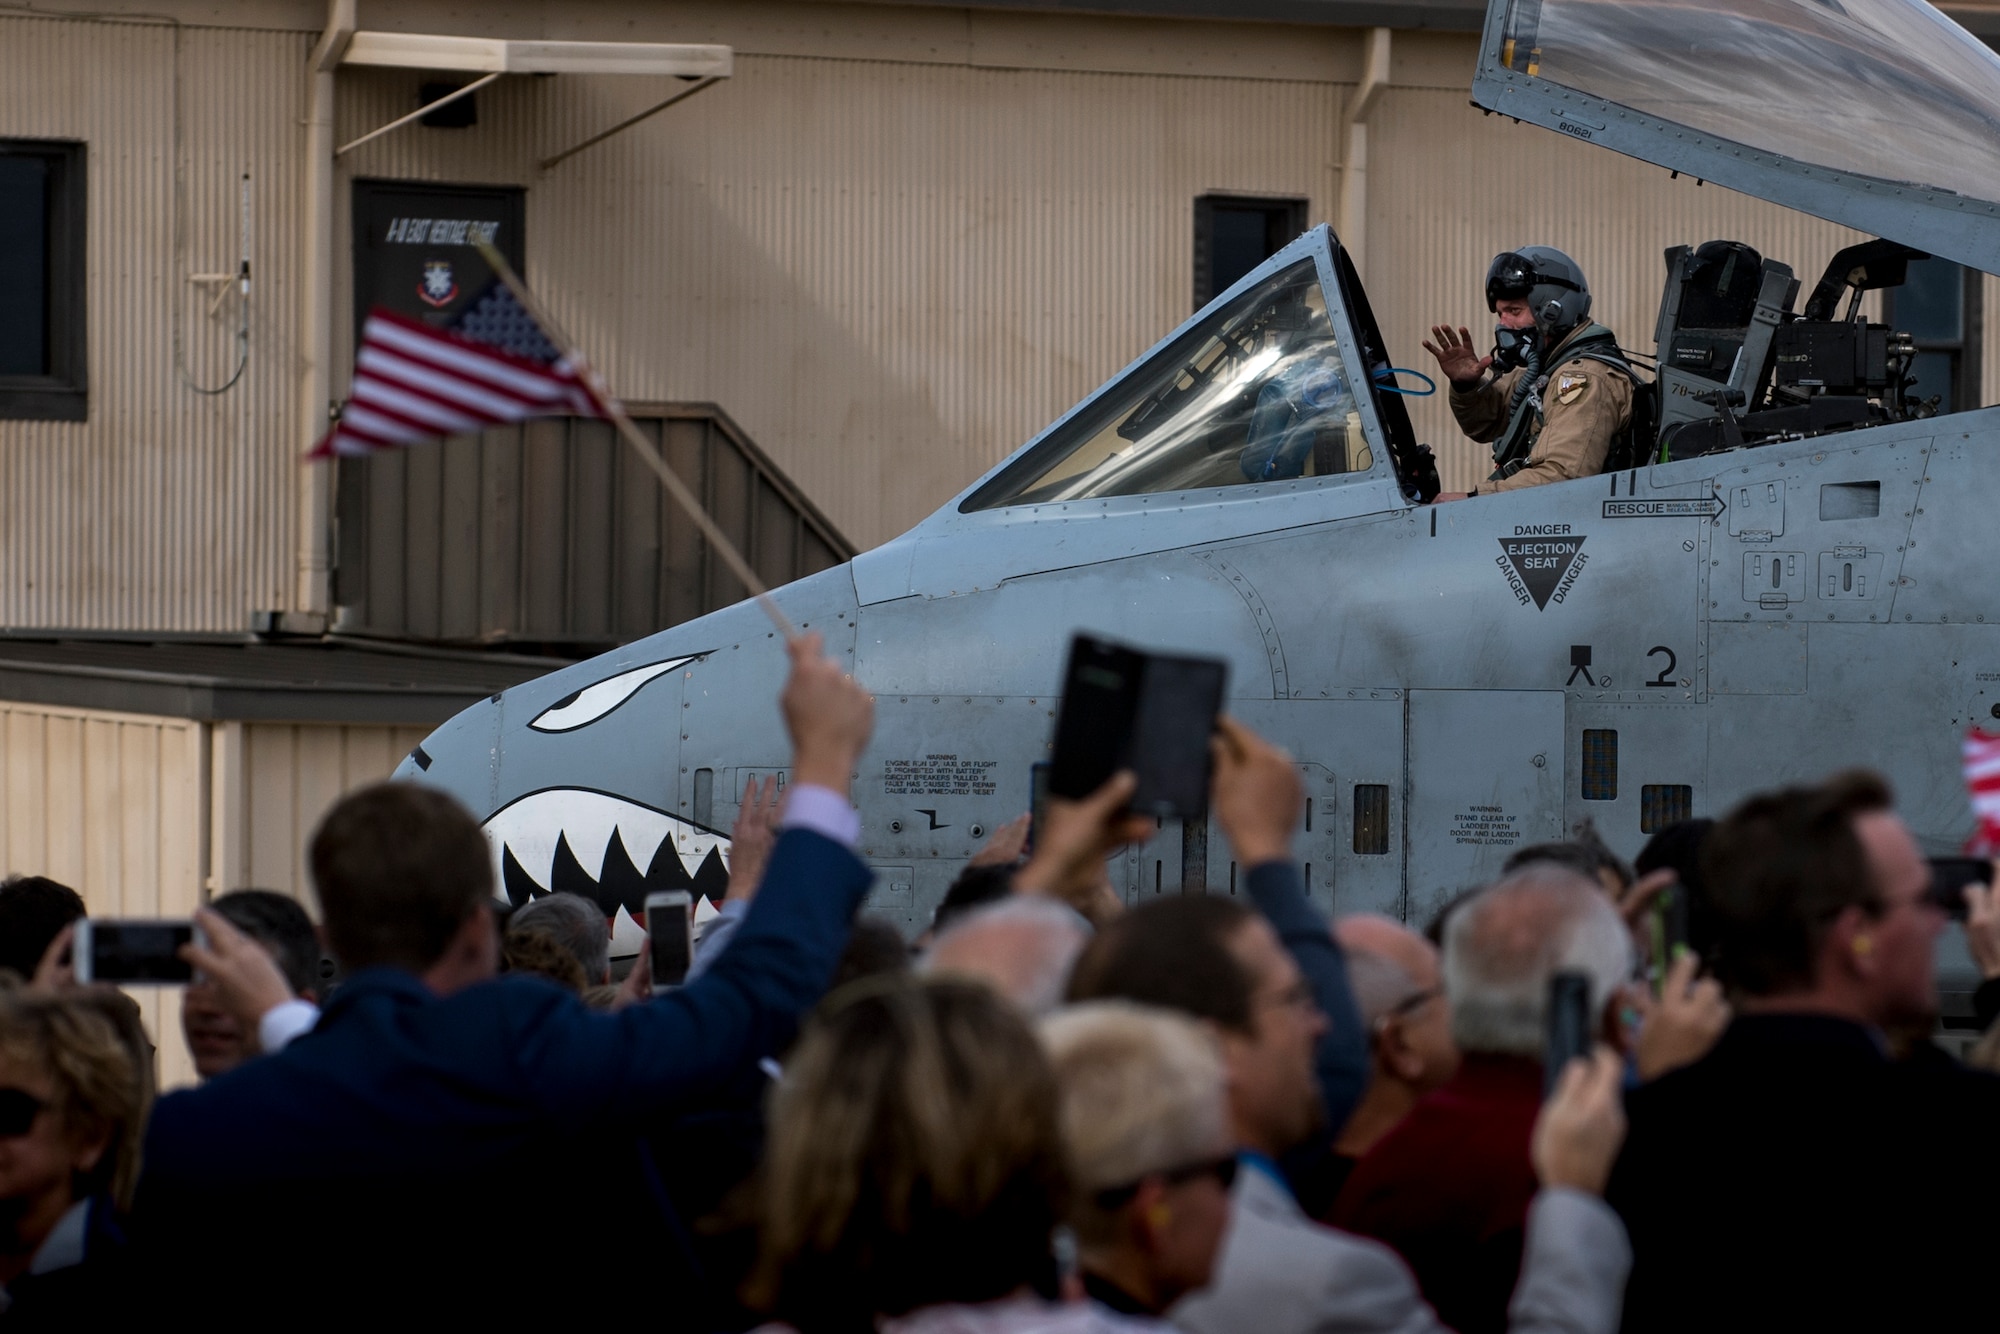 A pilot from the 74th Fighter Squadron taxis past a crowd of family and friends after returning from a deployment, Jan. 26, 2018, at Moody Air Force Base, Ga. During the seven-month deployment, the 74th FS flew more than 1,700 sorties, employed weapons more than 4,400 times, destroyed 2,300 targets and killed 2,800 ISIS insurgents. (U.S. Air Force photo by Senior Airman Daniel Snider)